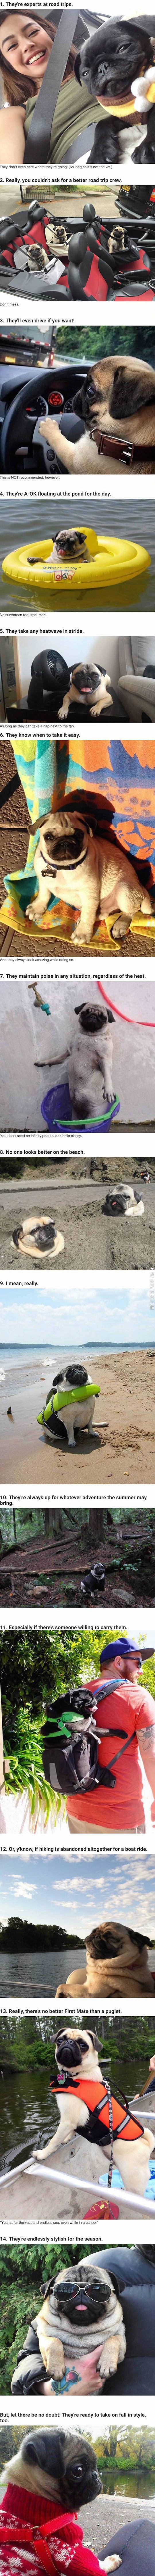 14+Reasons+Pugs+Are+The+Ultimate+Experts+In+Summer+Living